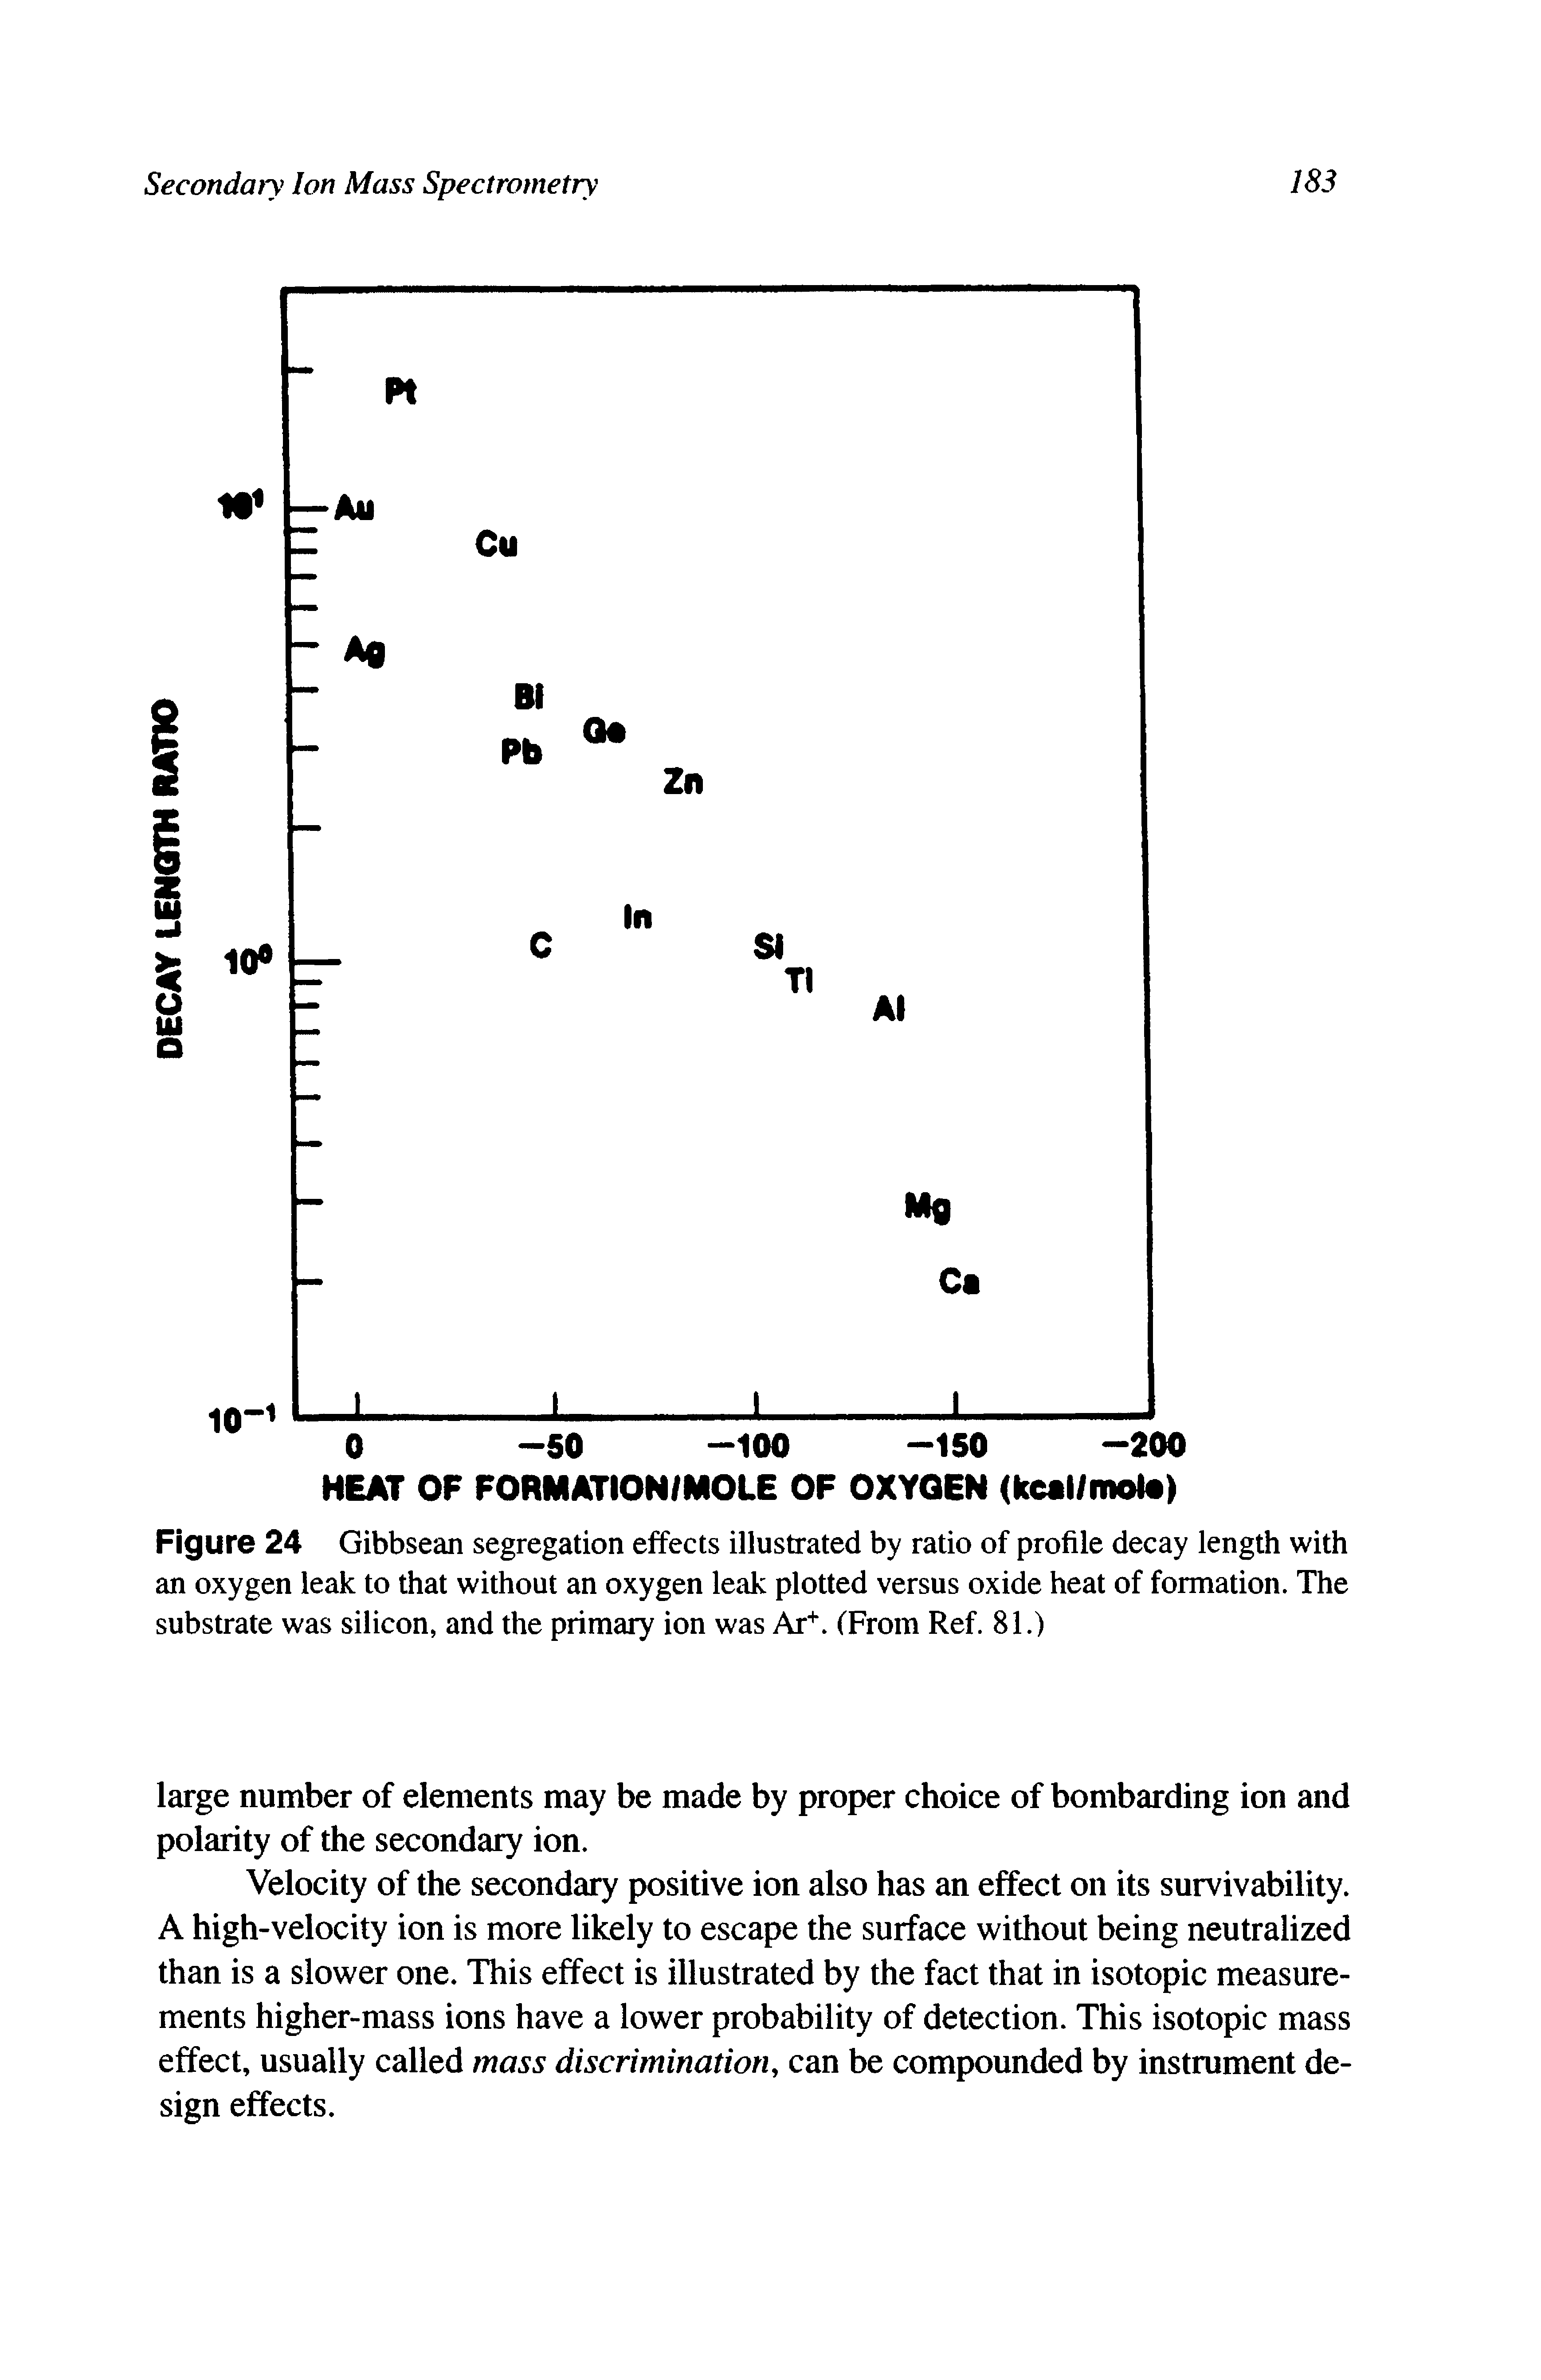 Figure 24 Gibbsean segregation effects illustrated by ratio of profile decay length with an oxygen leak to that without an oxygen leak plotted versus oxide heat of formation. The substrate was silicon, and the primary ion was Ar+. (From Ref. 81.)...